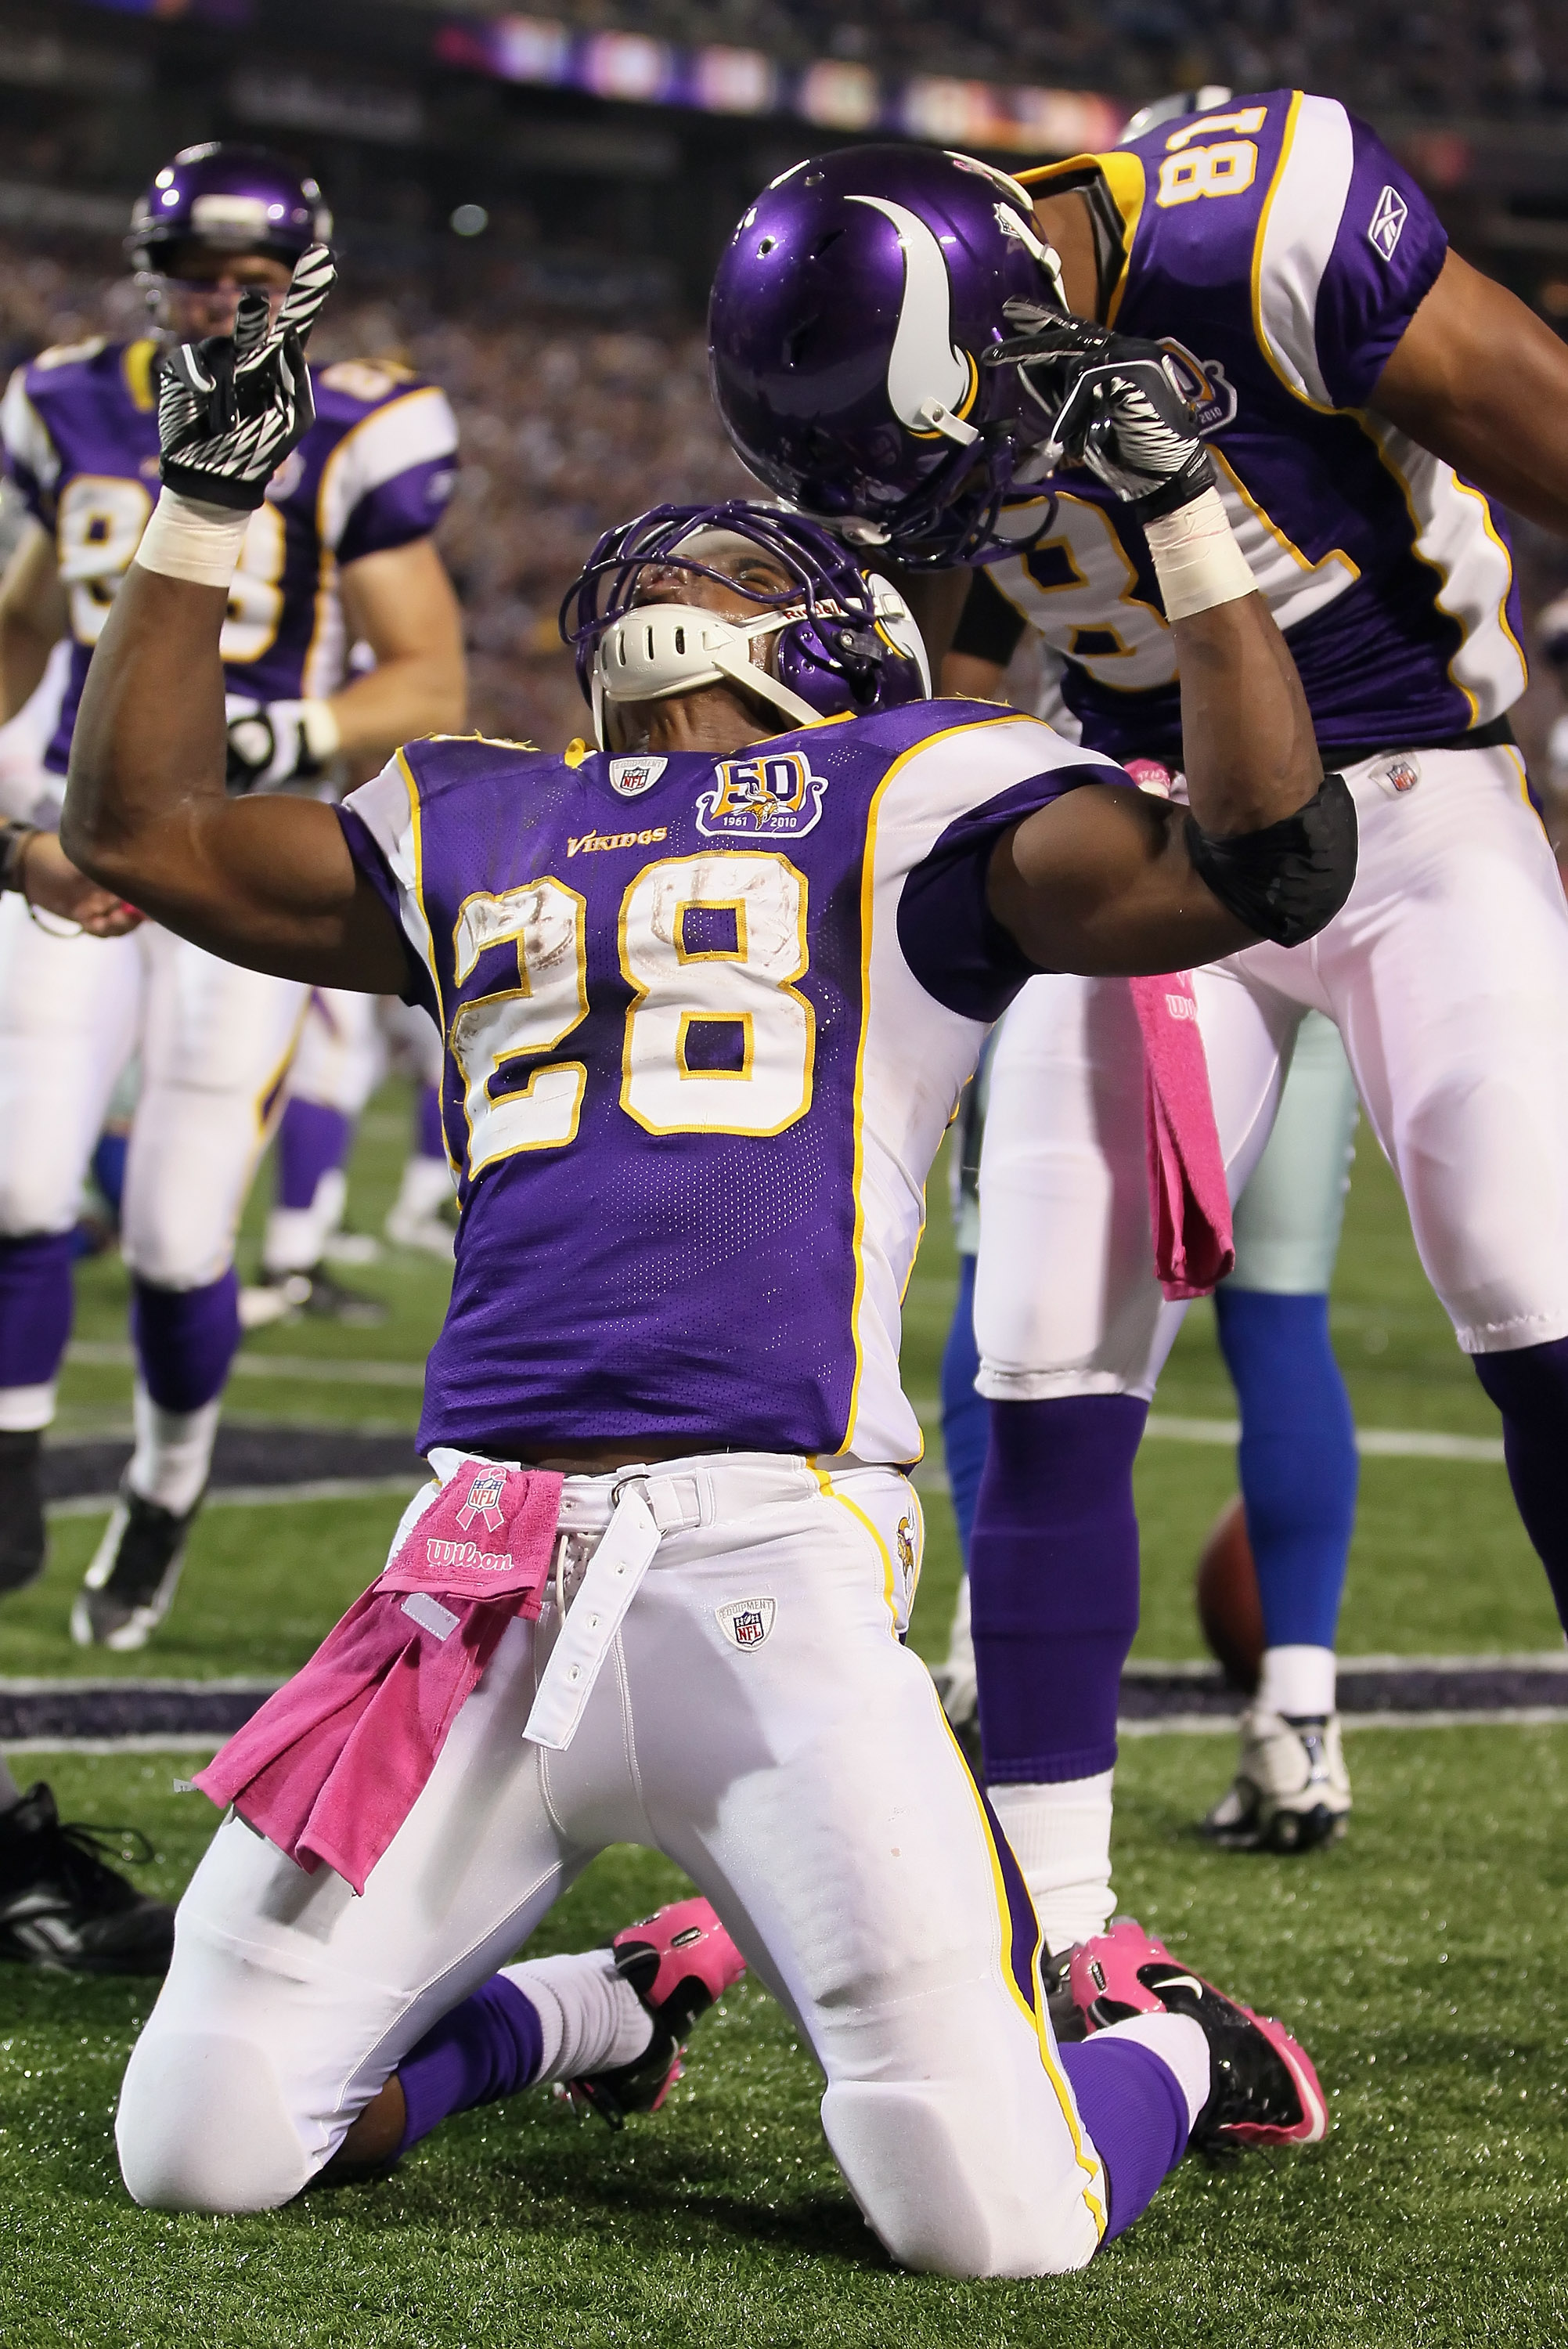 MINNEAPOLIS - OCTOBER 17:  Running back Adrian Peterson #29 of the Minnesota Vikings celebrates a touchdown against the Dallas Cowboys during the third quarter at Mall of America Field on October 17, 2010 in Minneapolis, Minnesota.  The Vikings defeated C